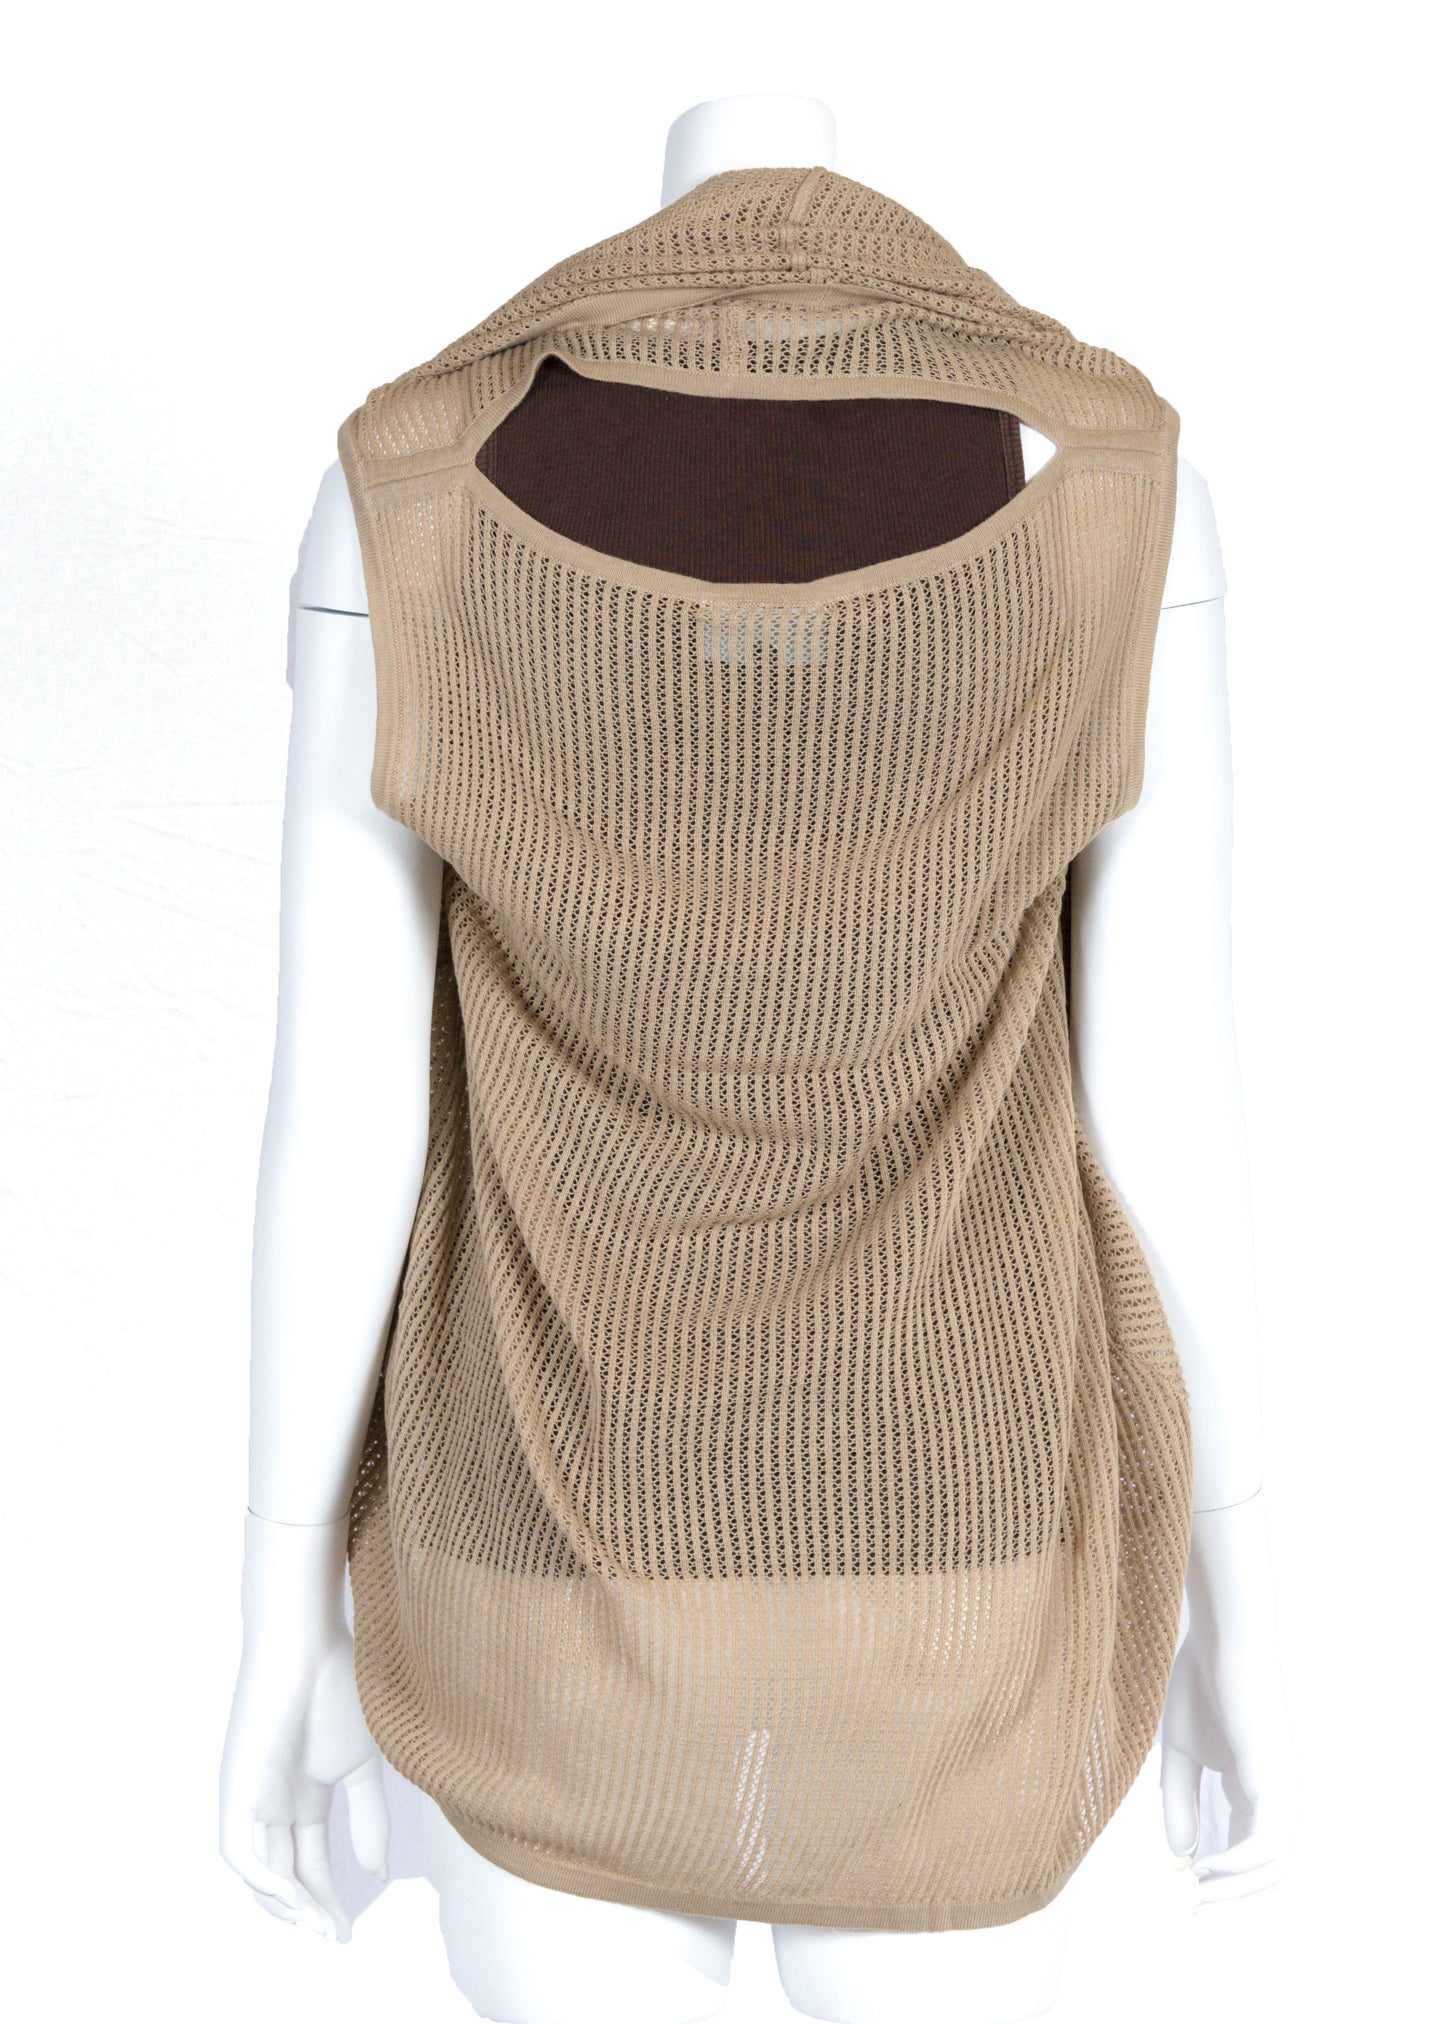 Open back hole can be concealed or left open for more air flow and for babywearing